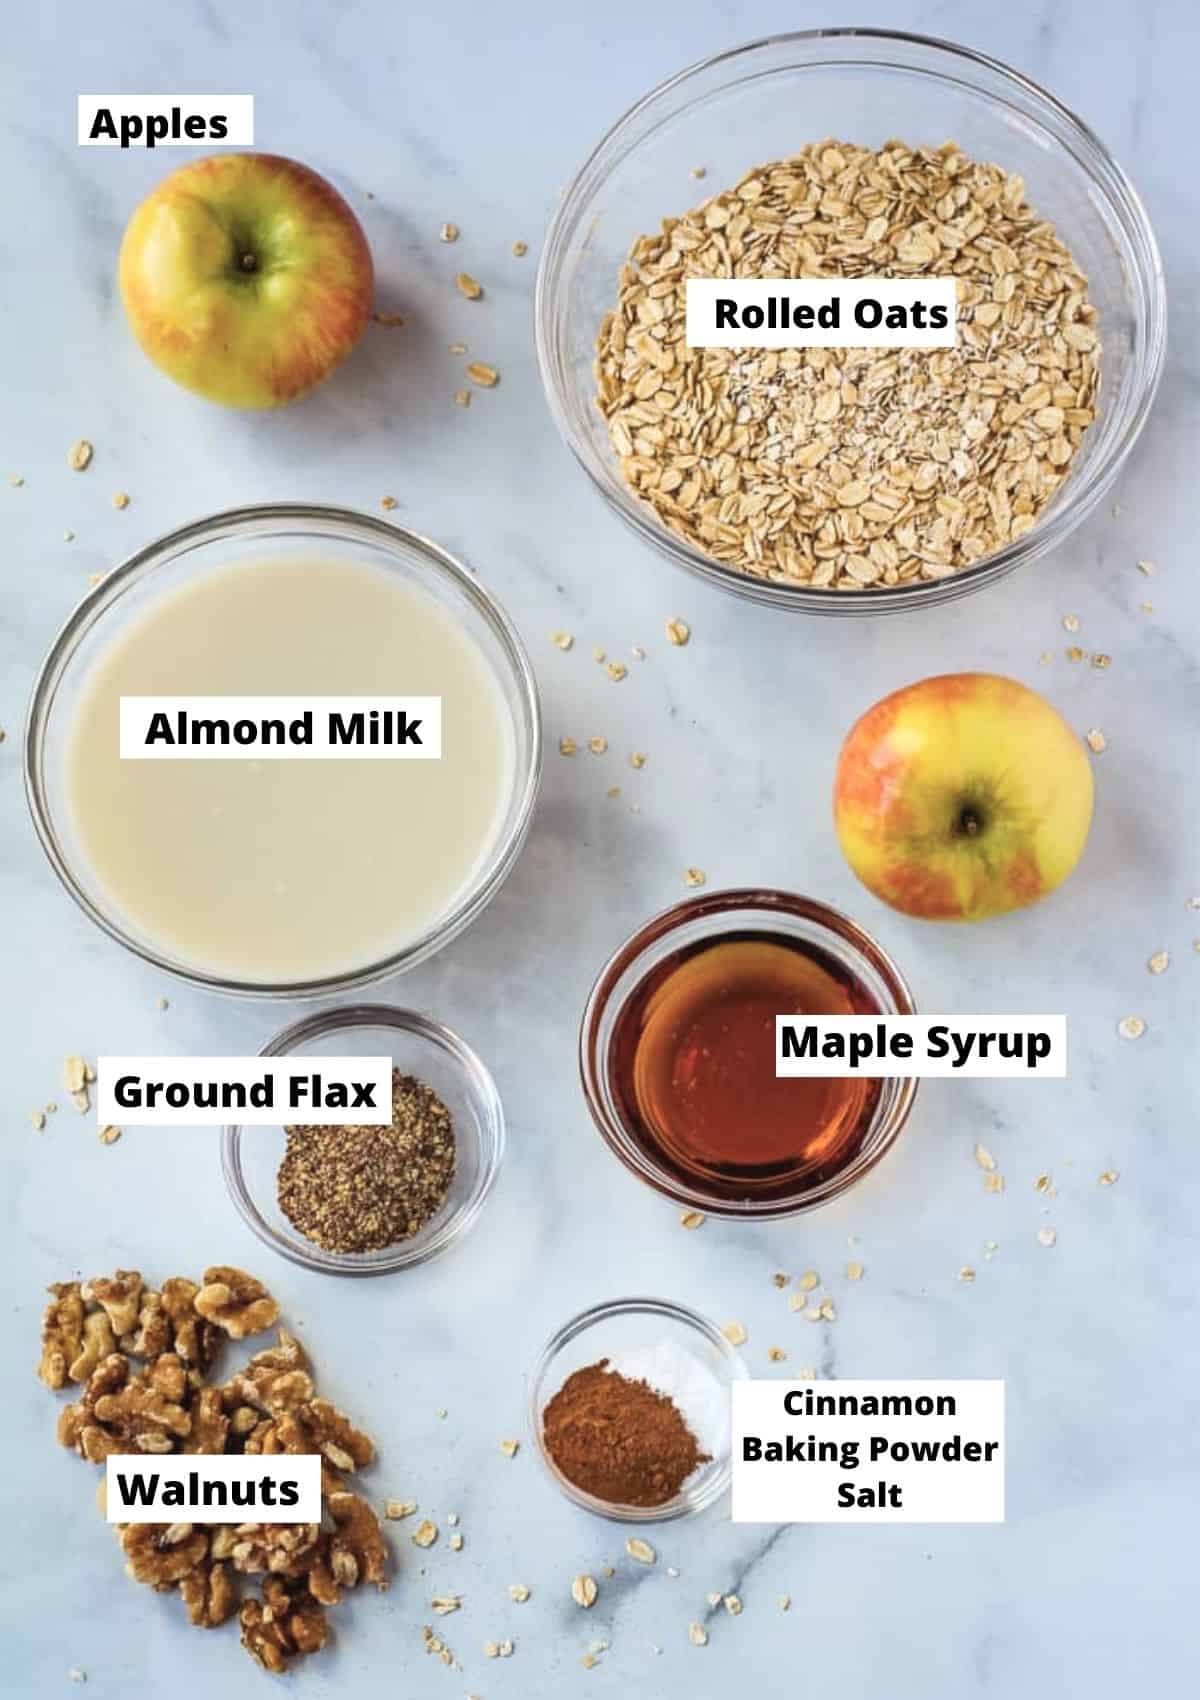 Ingredients for baked oatmeal including rolled oats, apples, almond milk, maple syrup, walnuts, ground flax, cinnamon, baking powder, and salt. 